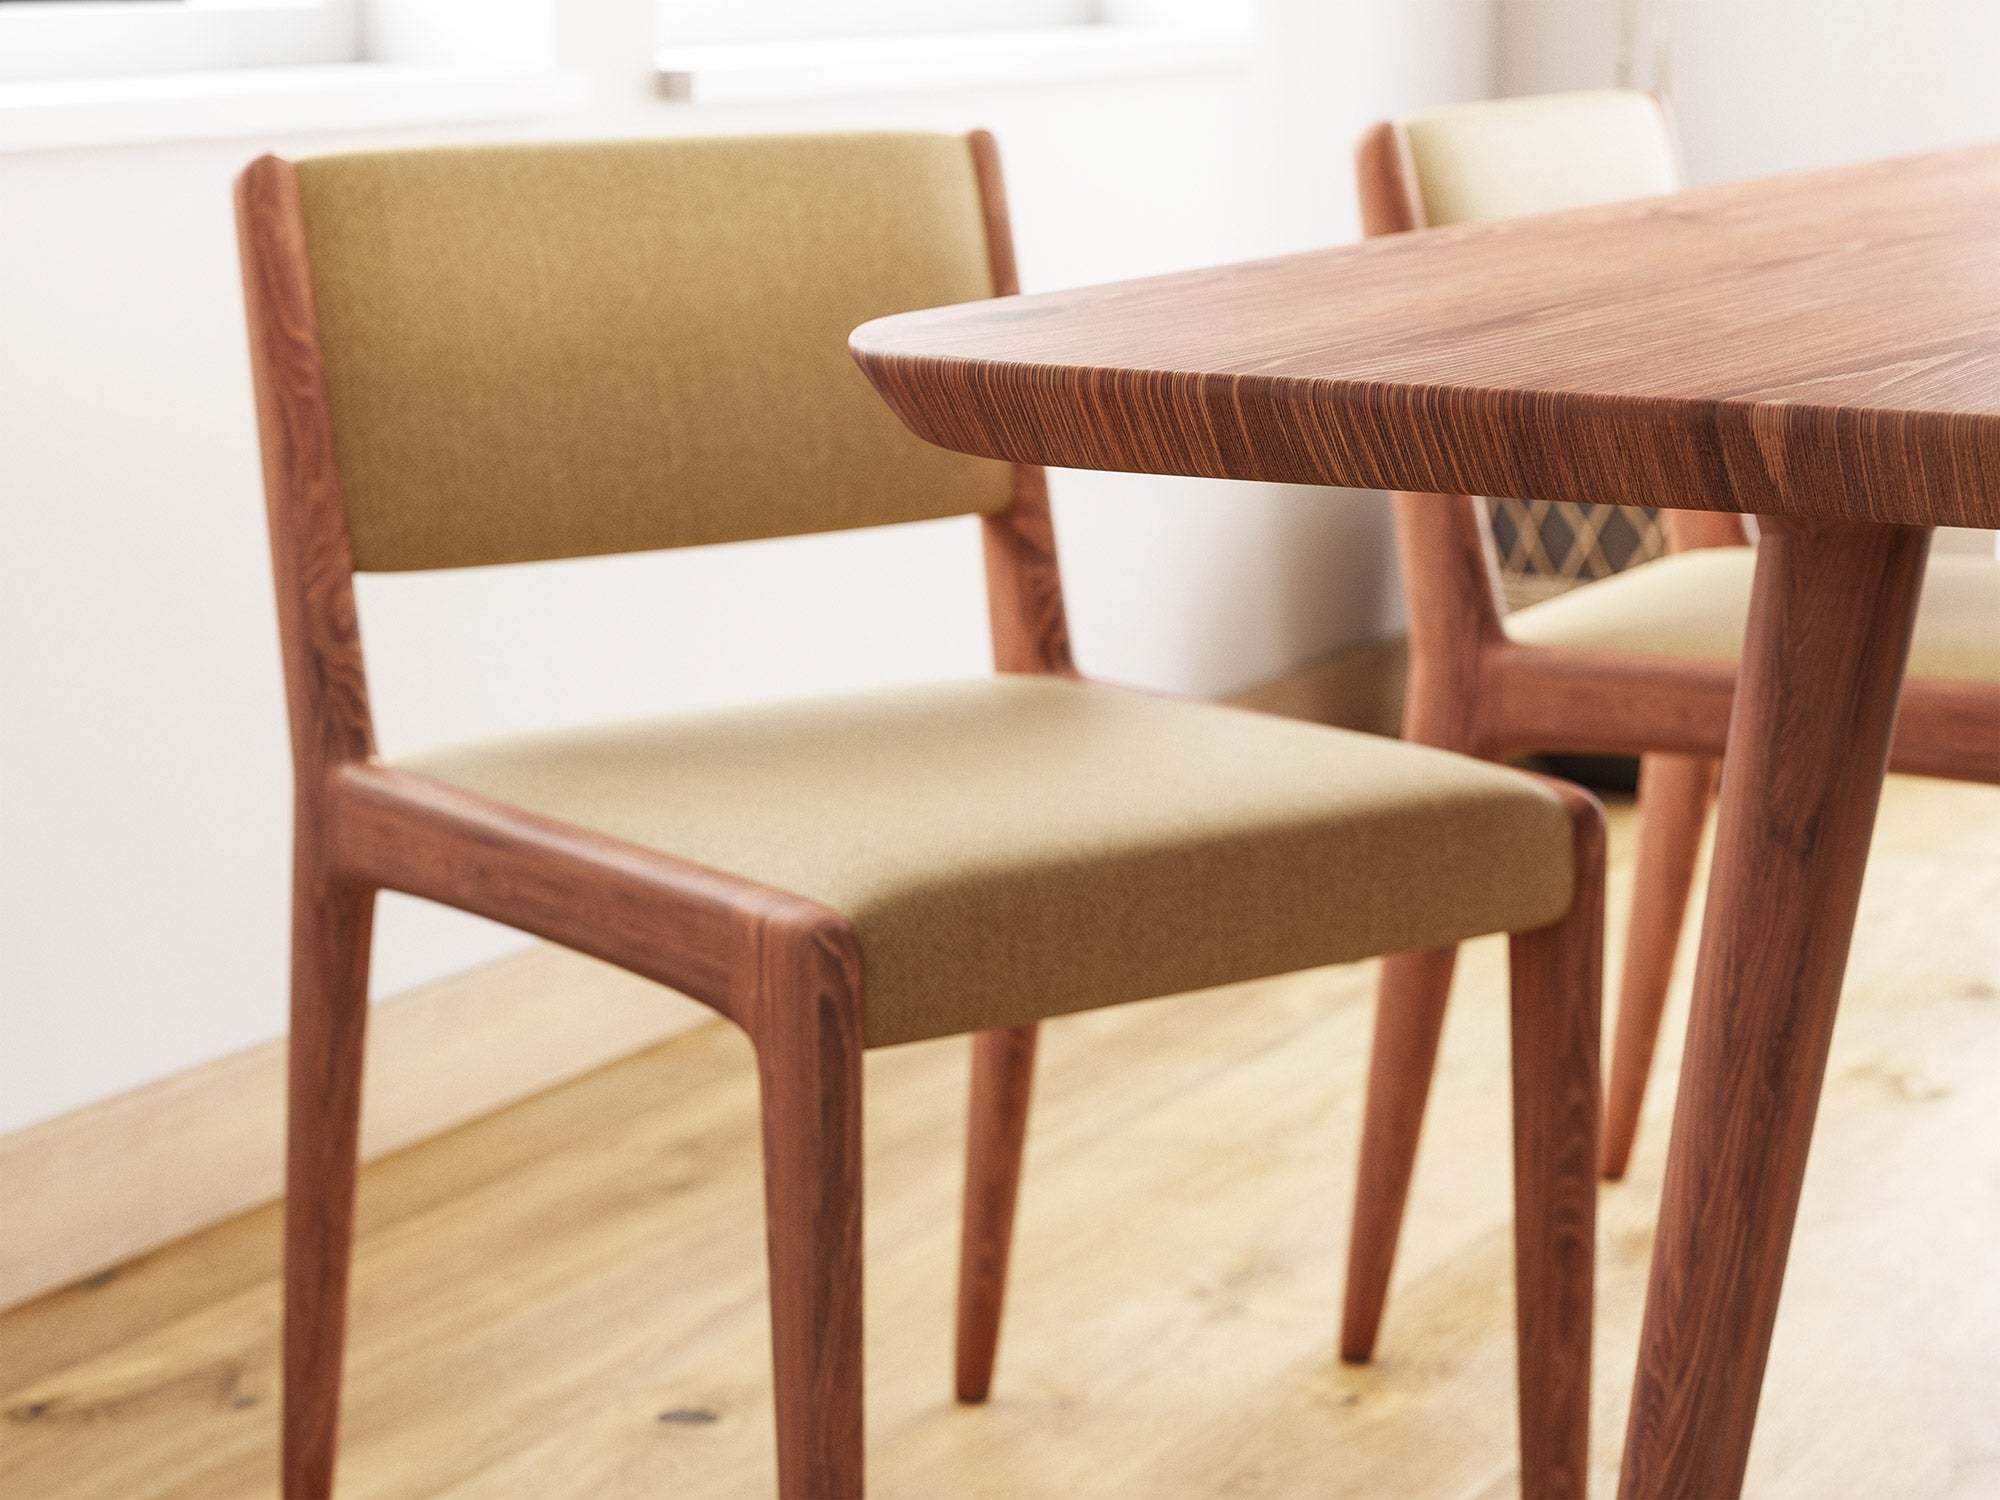 G: Shown in walnut wood with the Jasmi Dining Chair in walnut and Smart Wheat fabric